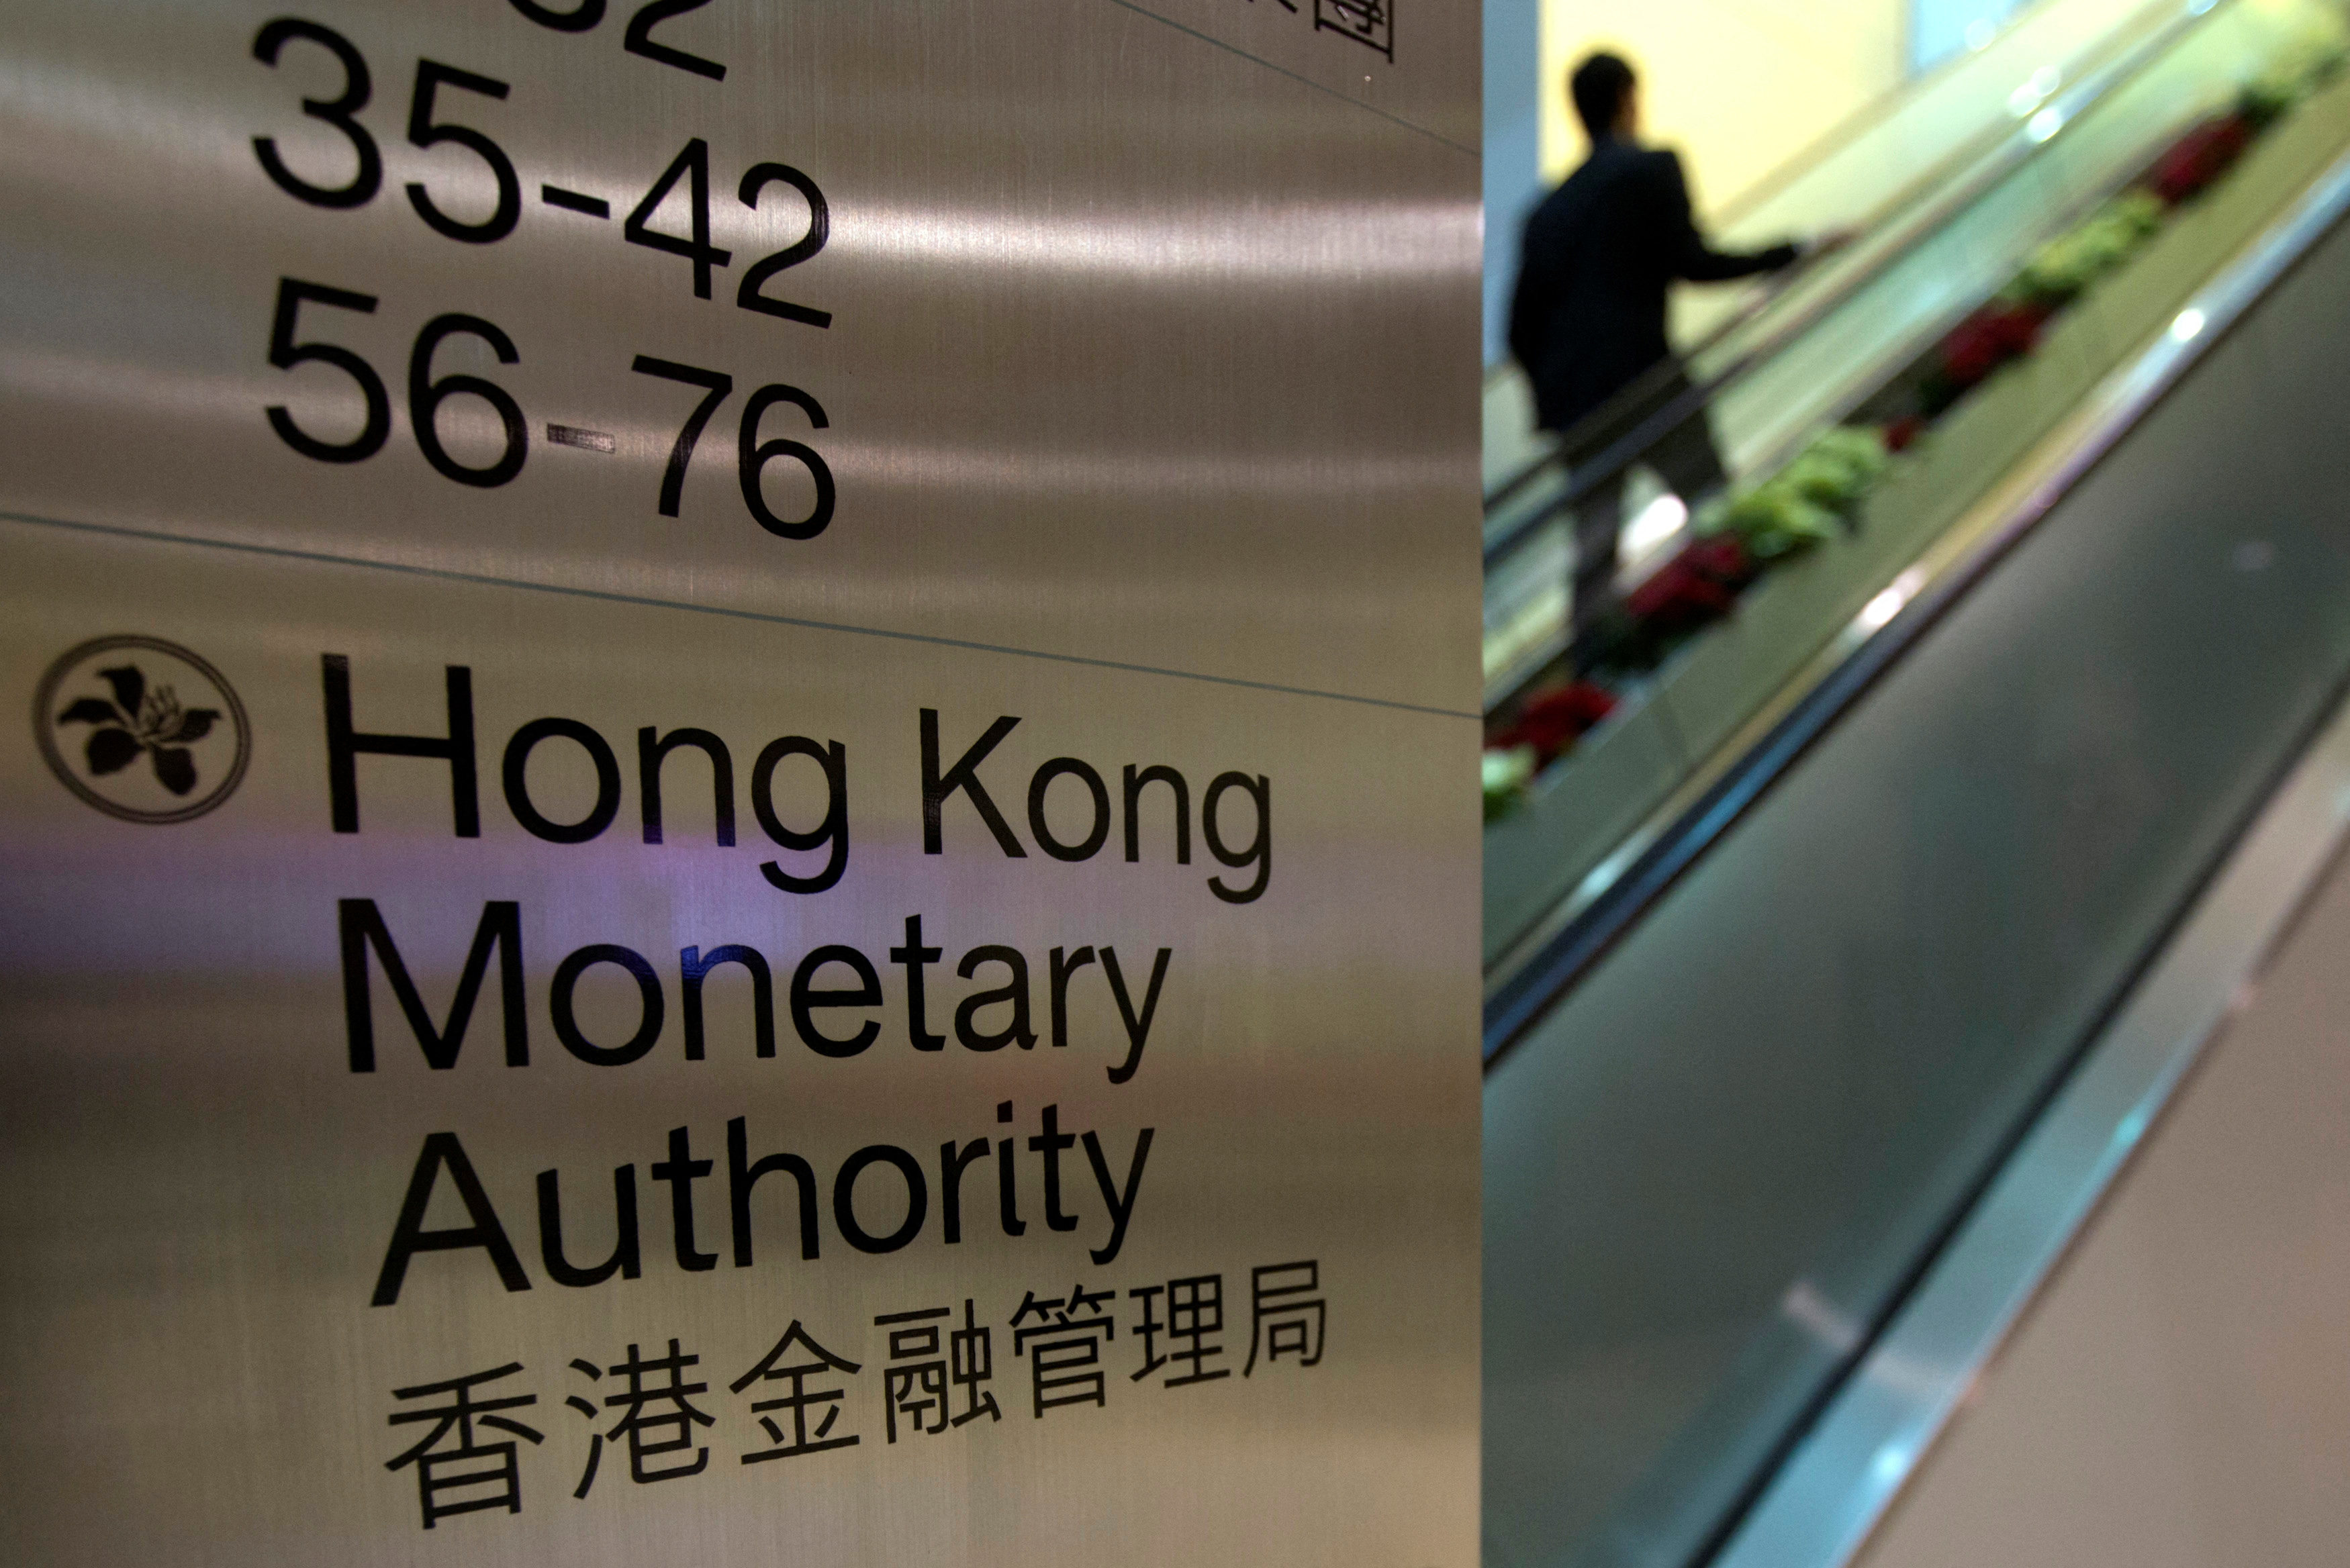 A security guard walks past a directory board inside the Hong Kong Monetary Authority building. Photo: Reuters